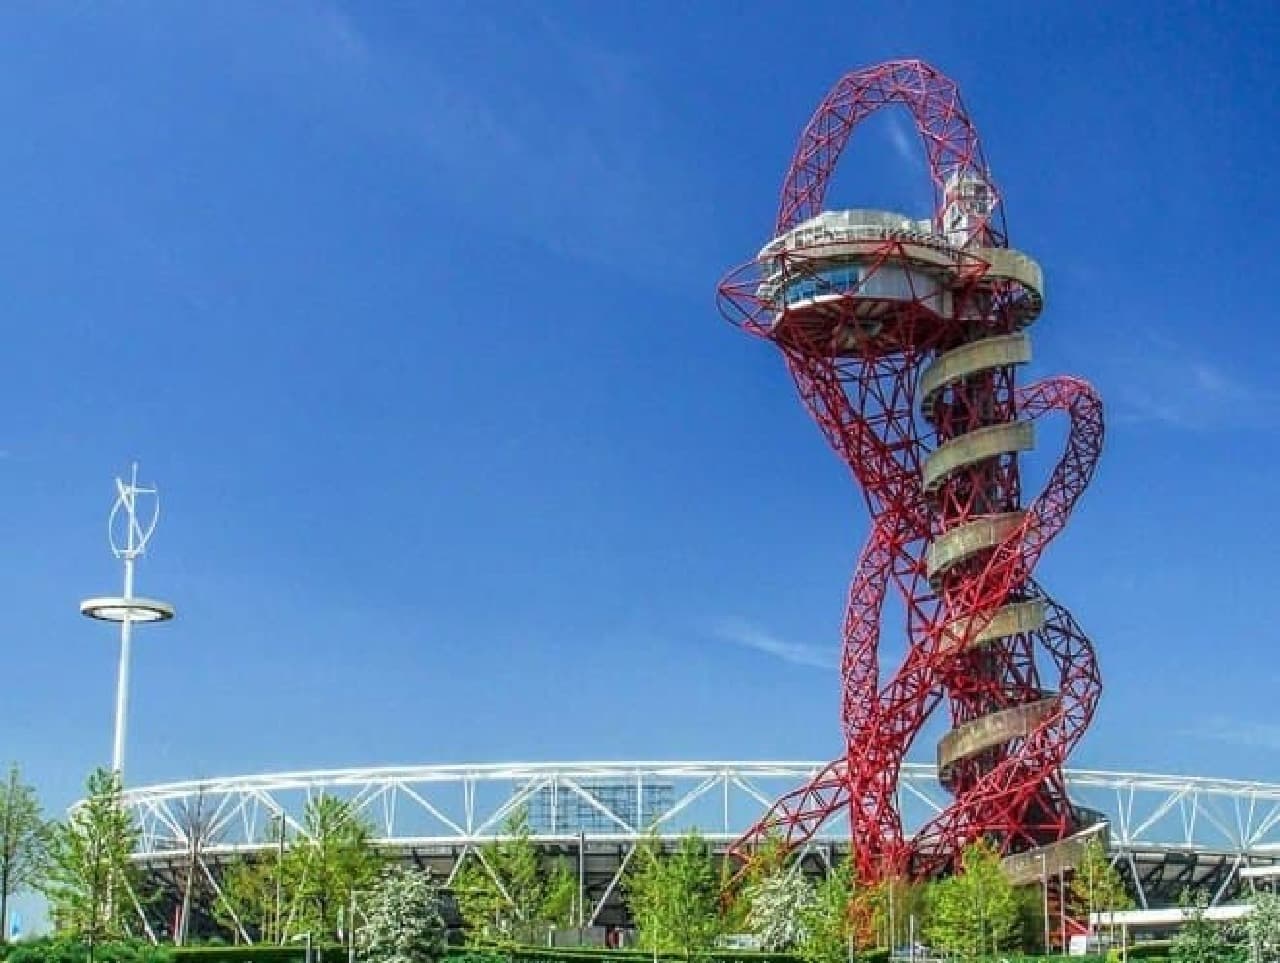 New attraction "THE SLIDE" appears in "ArcelorMittal Orbit"